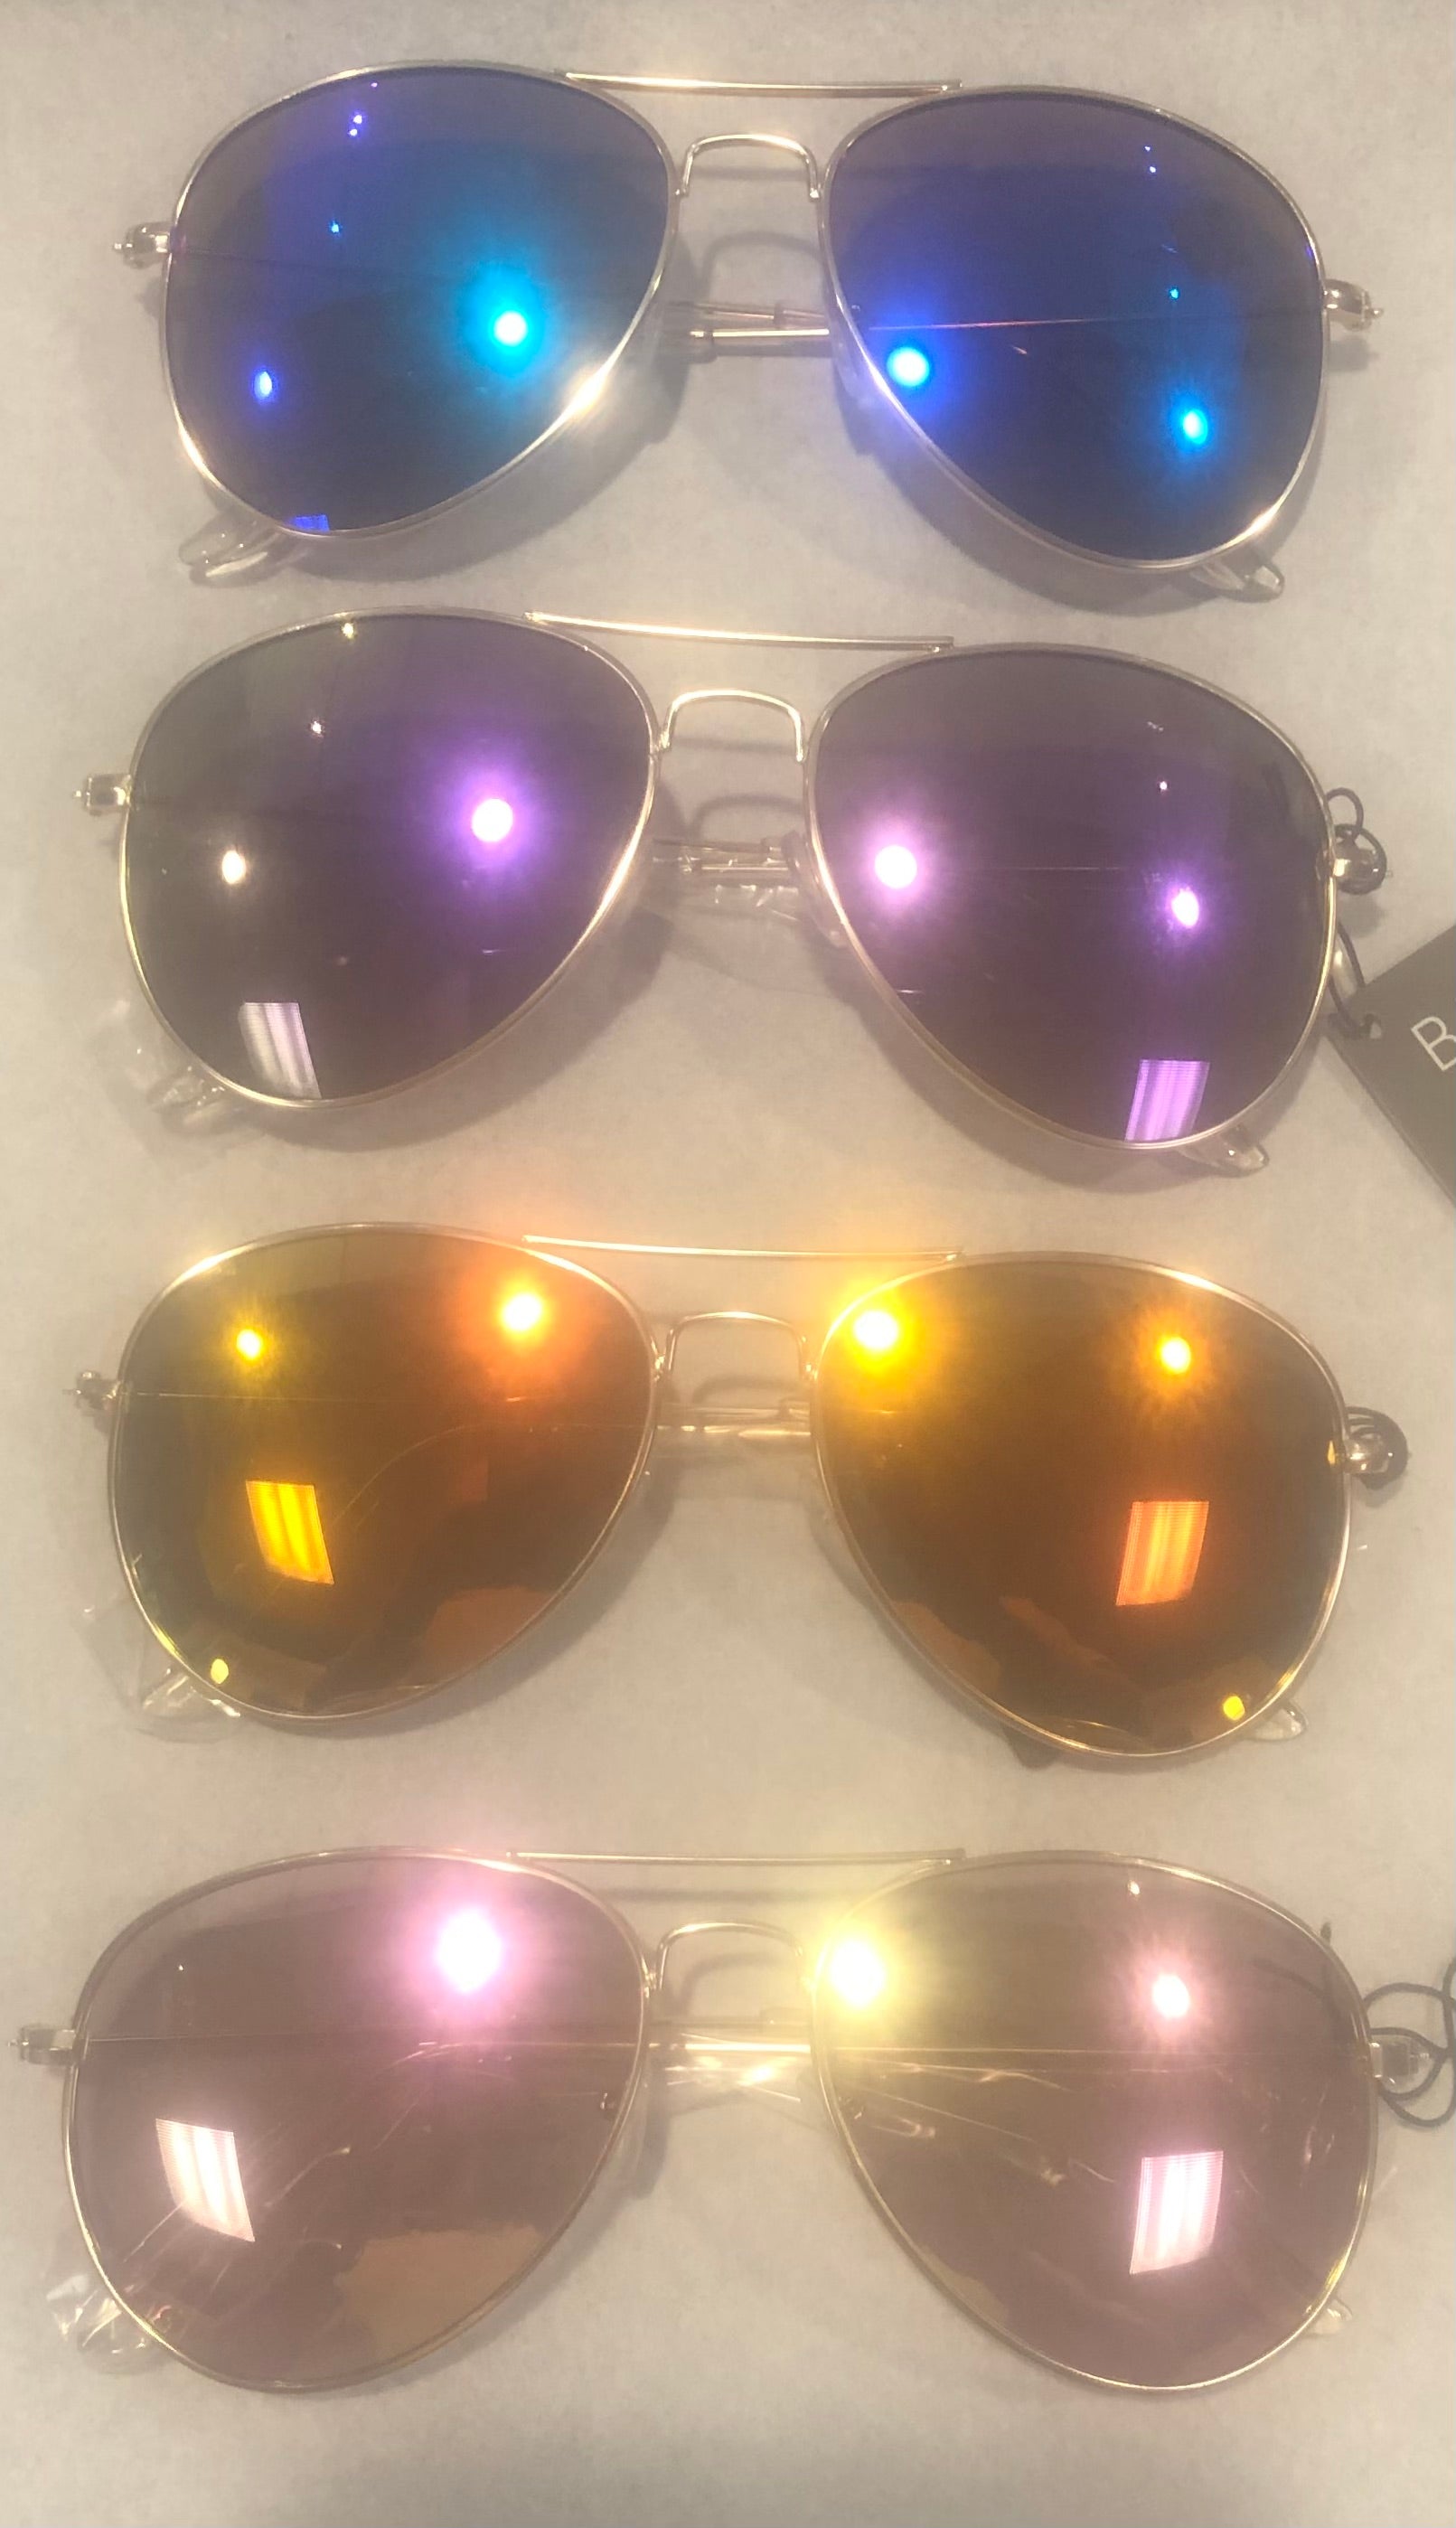 Sunglasses 4202 Aviator Style Collection